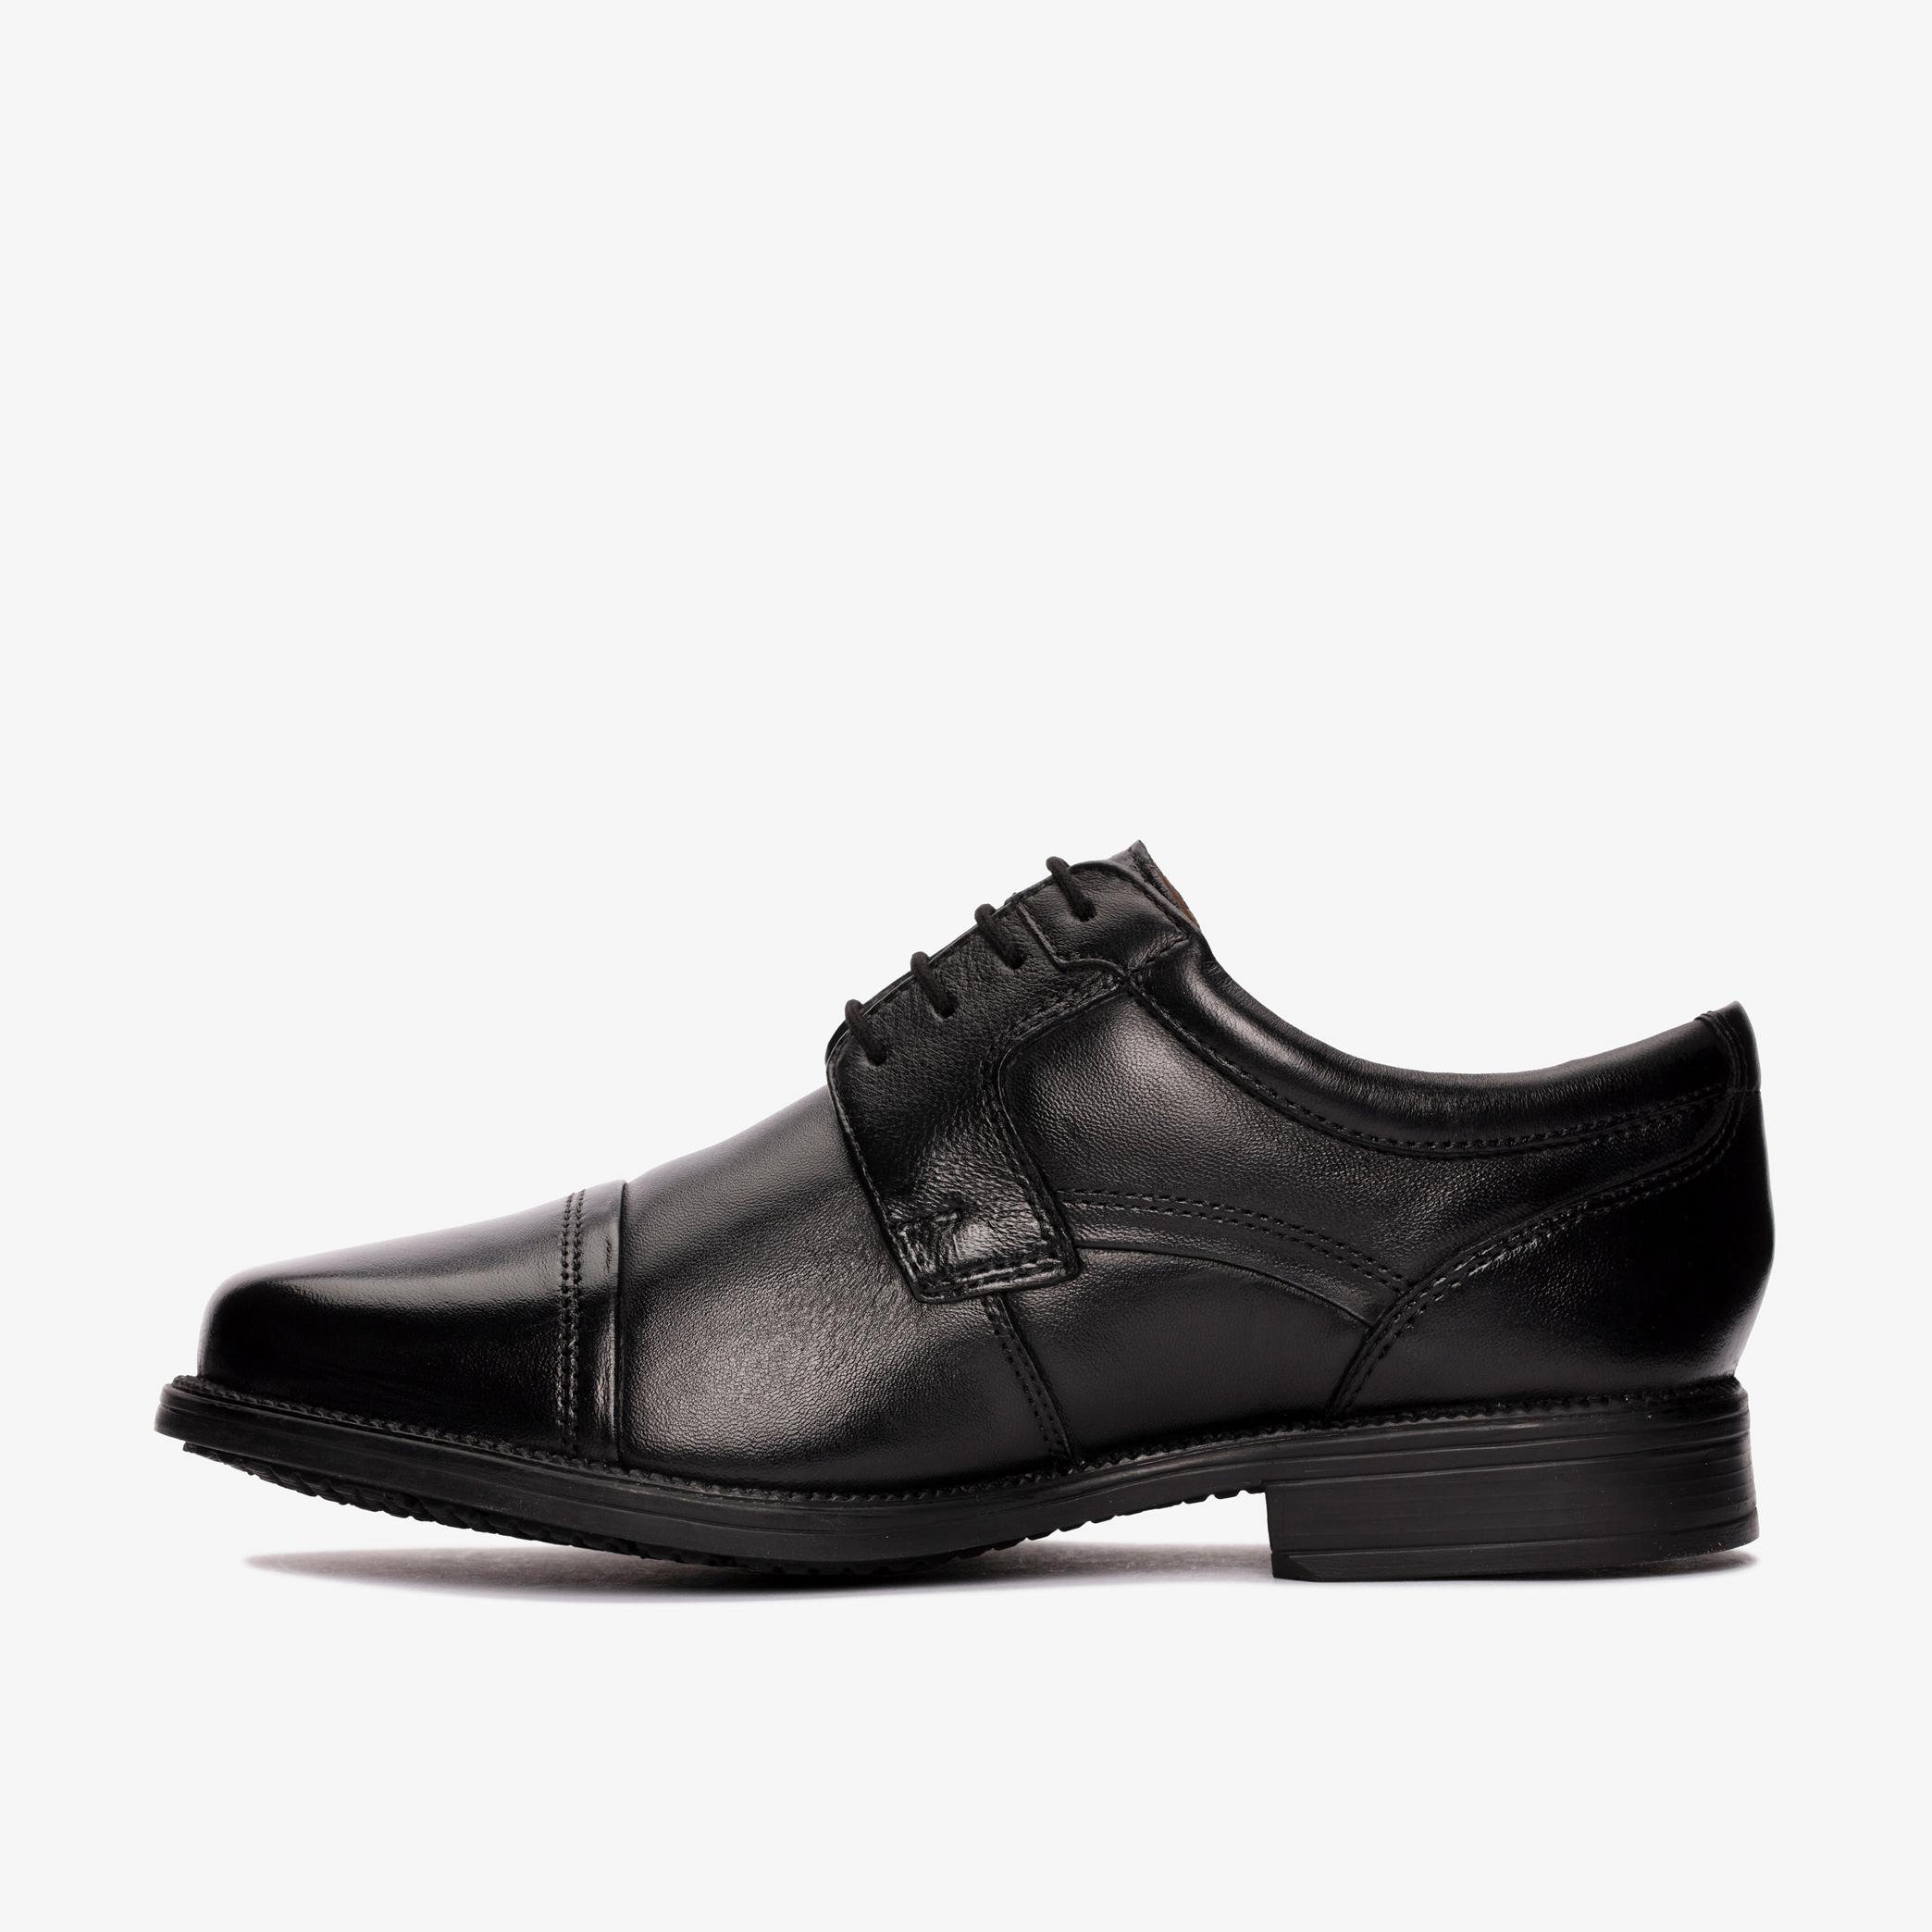 Hail Cap Black Leather Shoes, view 2 of 6